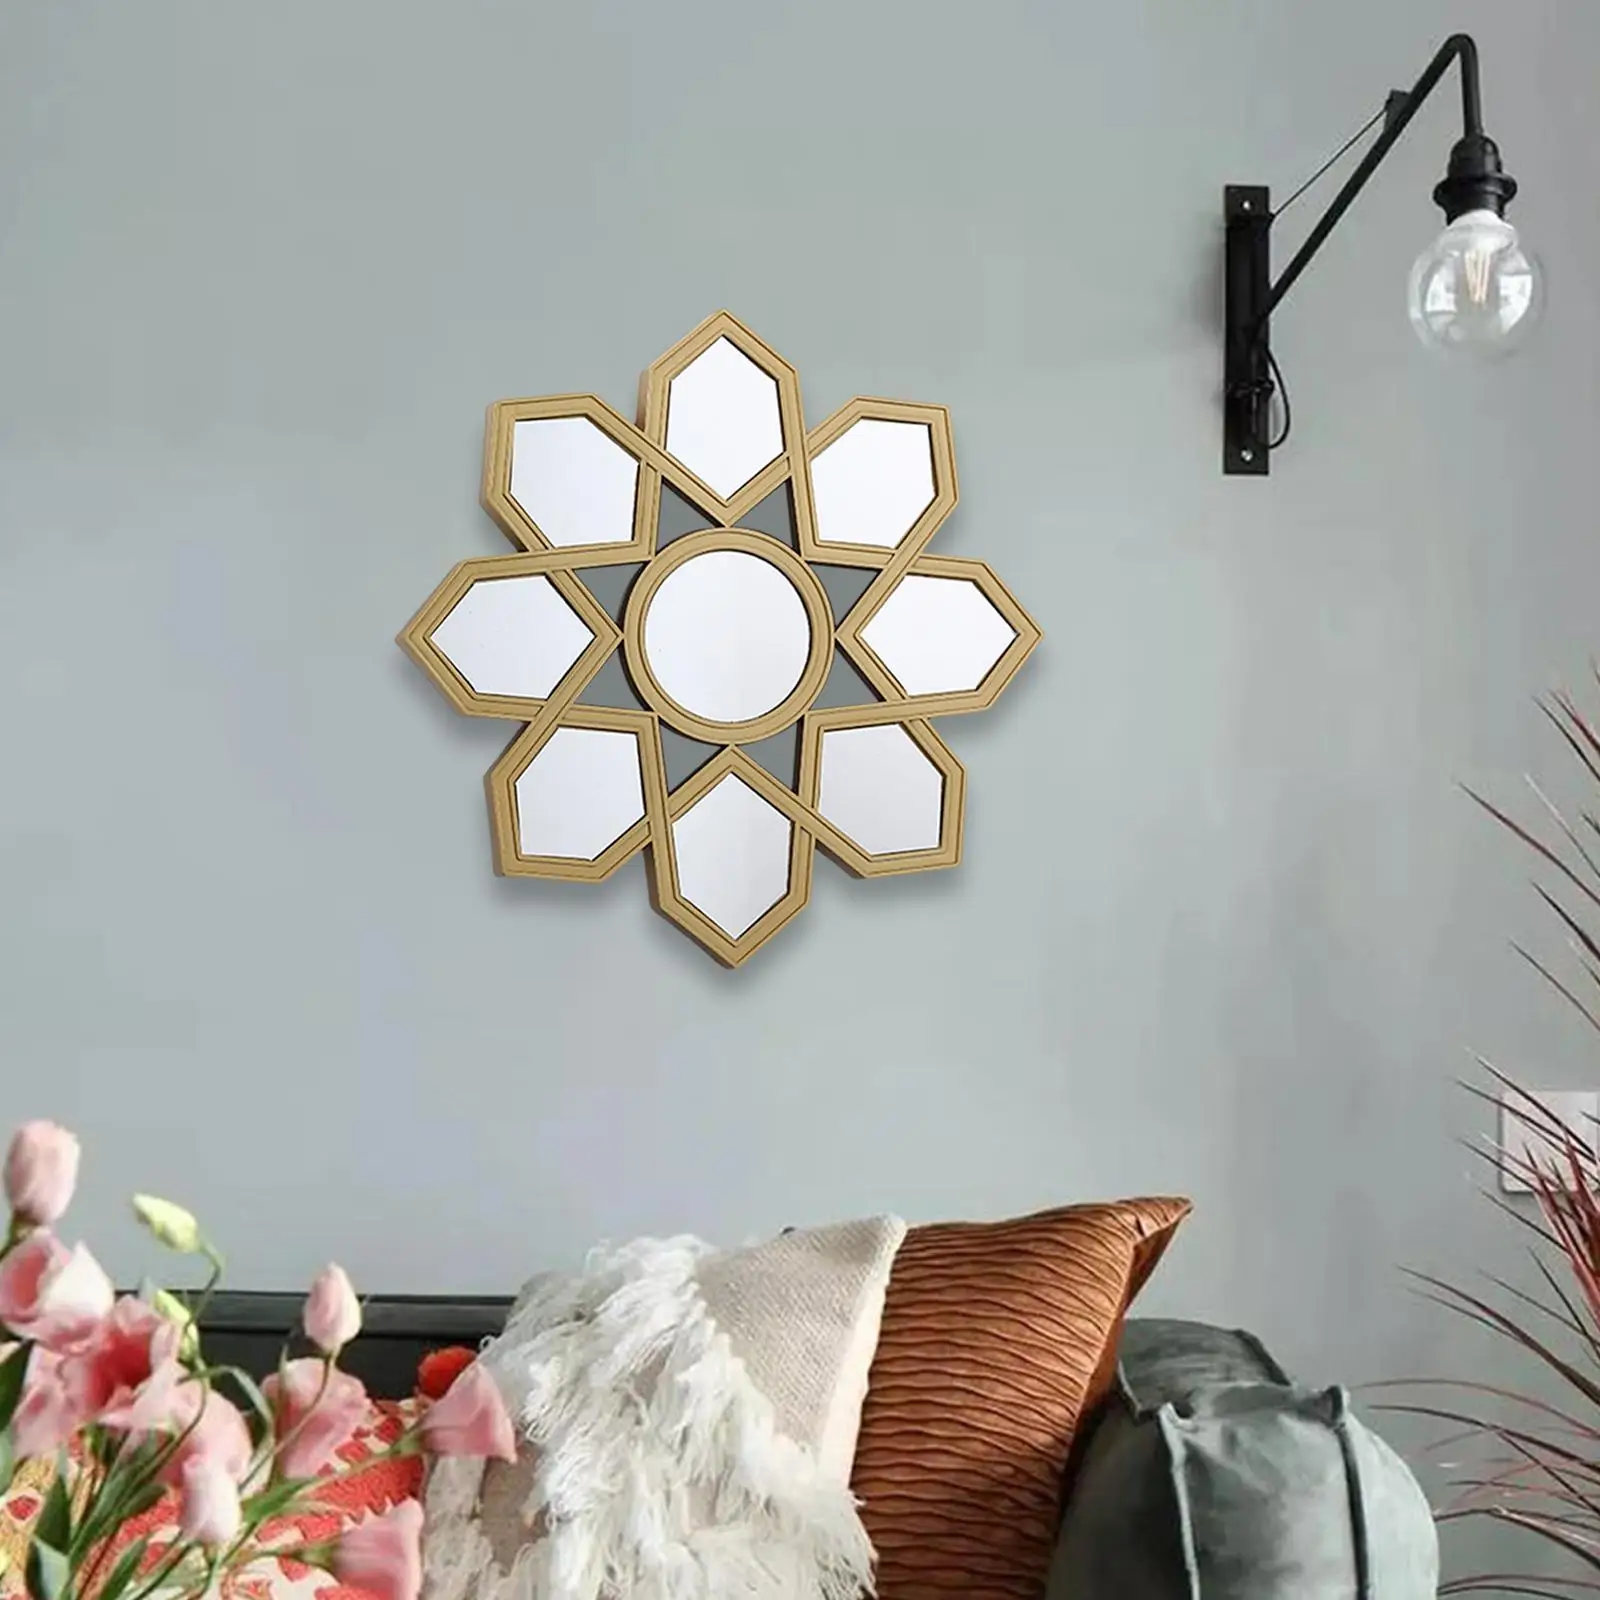 Modern Wall Hanging Mirror, Decorative 25cm Craft Round Mirror for Entrance Living Room Home Furnishing Corridor Ornament